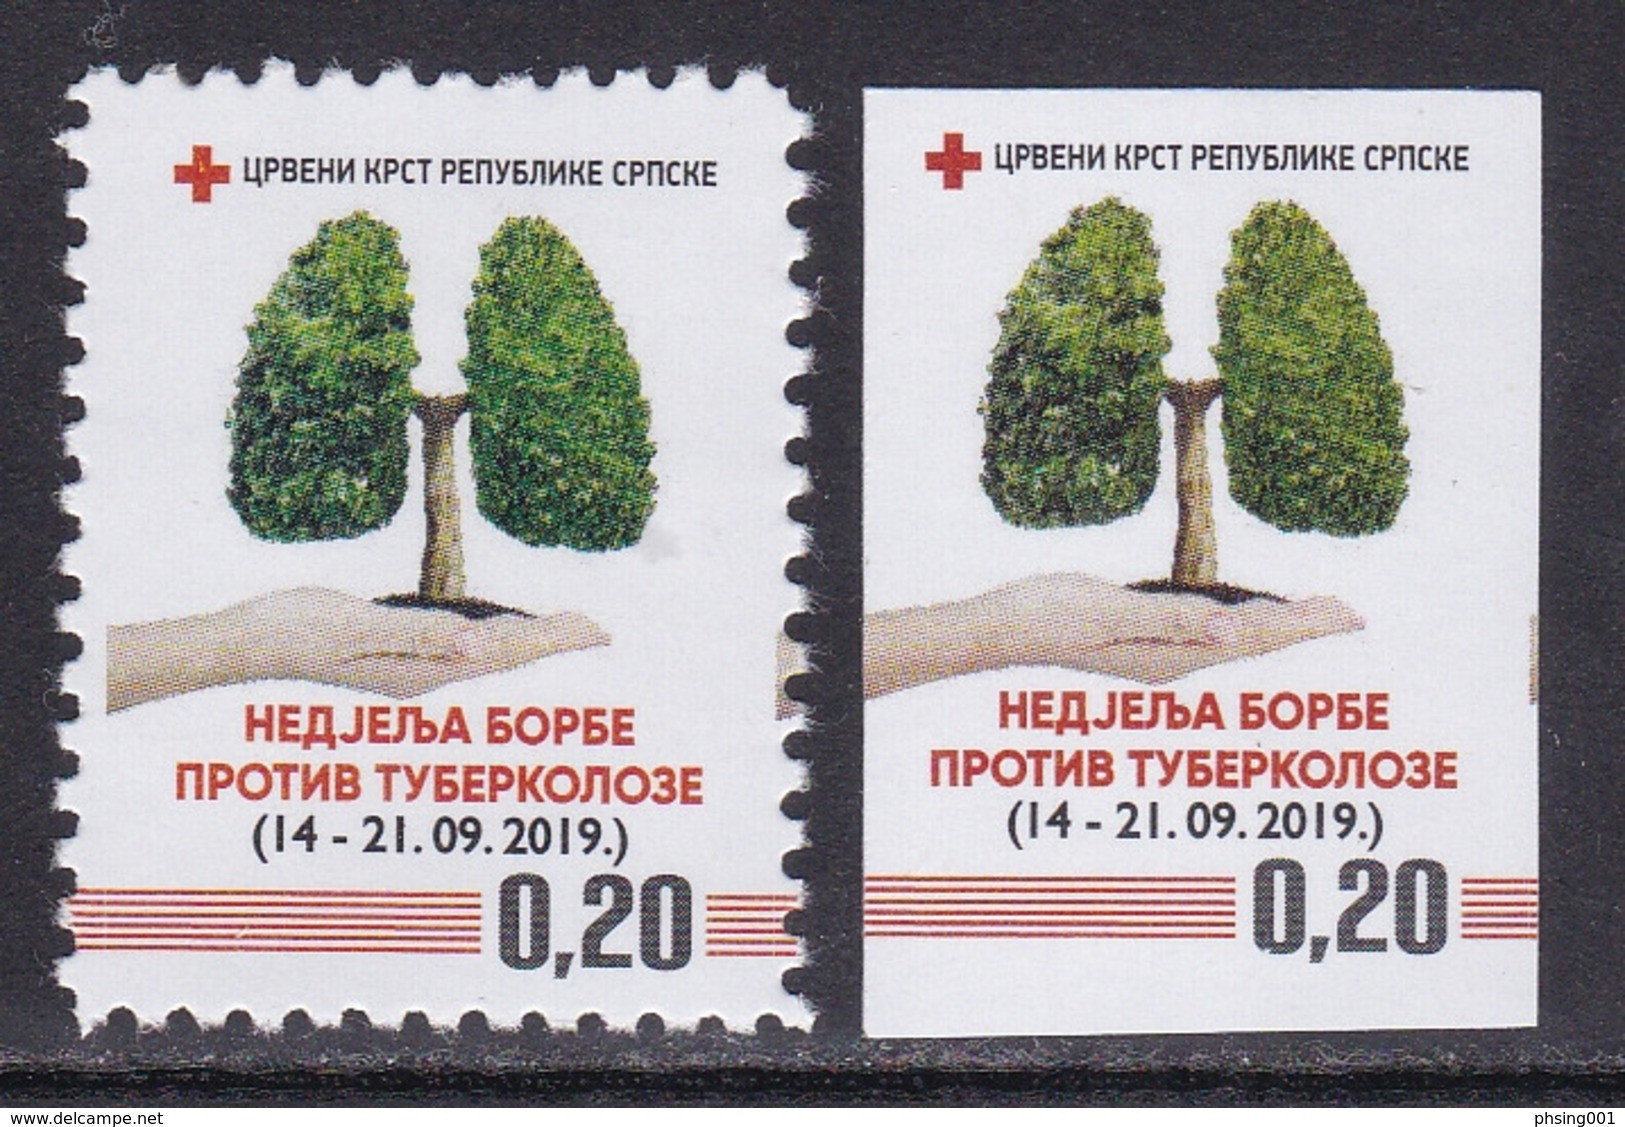 Bosnia Serbia 2019 TBC Red Cross Tax Charity Surcharge, Perforated + Imperforated Stamp MNH - Red Cross